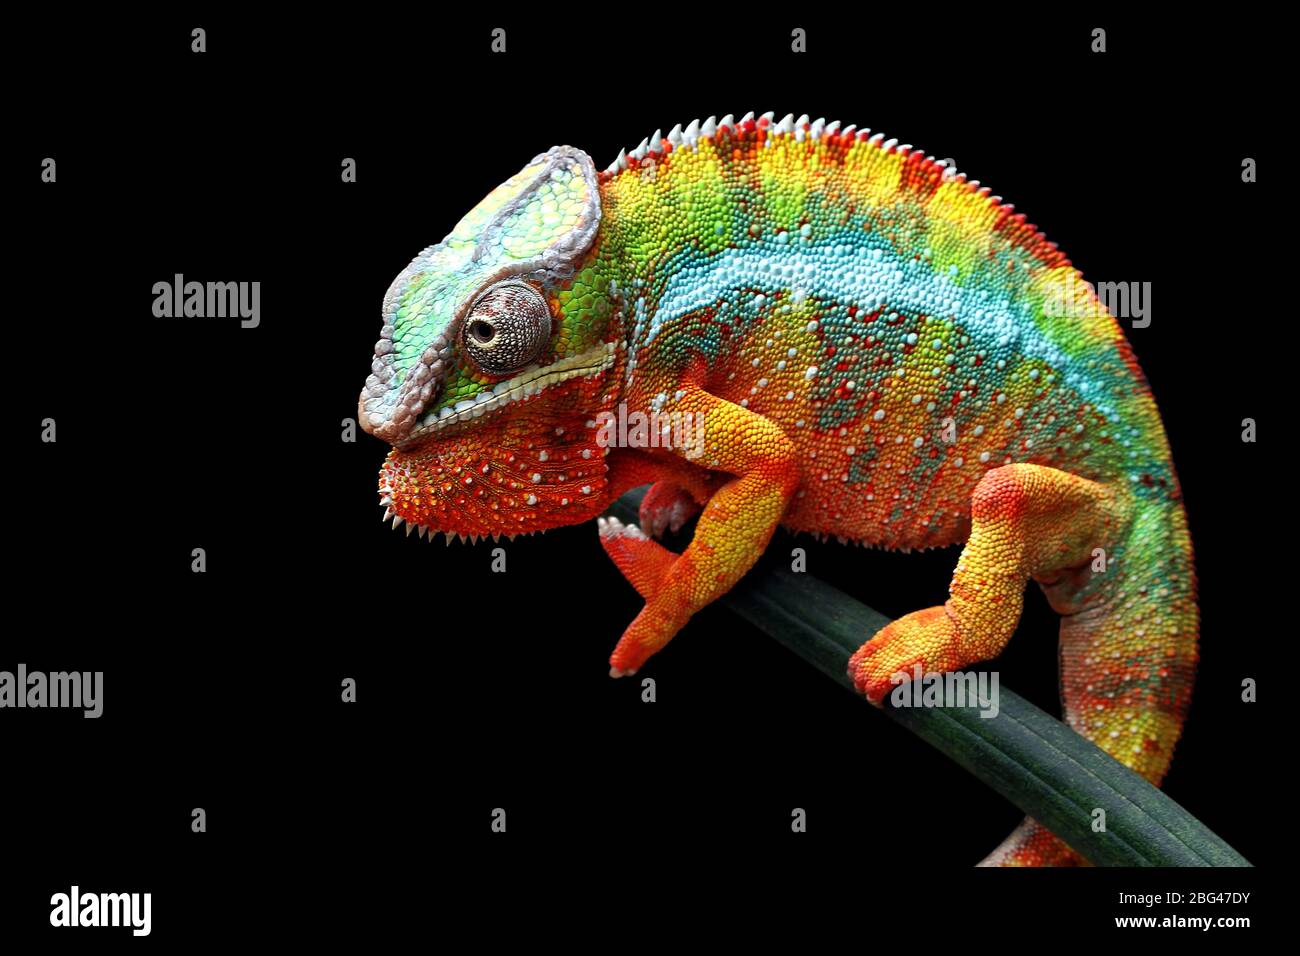 Portrait of a panther chameleon on a branch, Indonesia Stock Photo